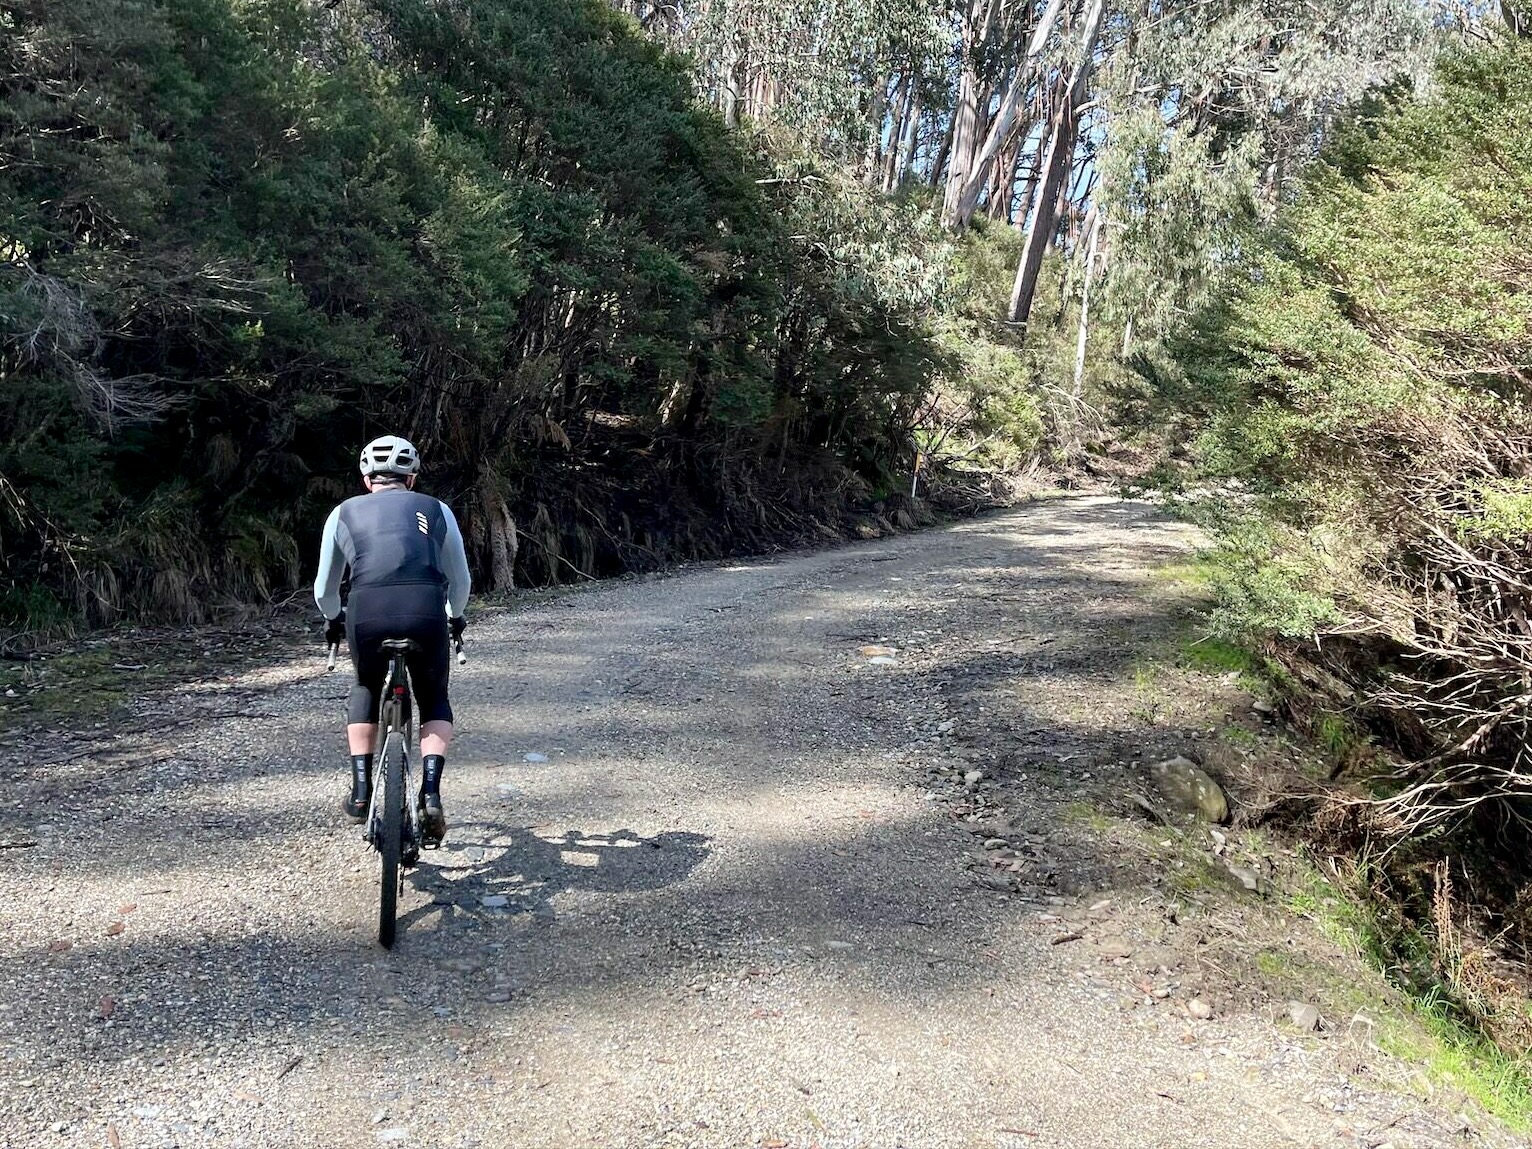 Cyclist riding up a winding gravel road surrounded by native bushland